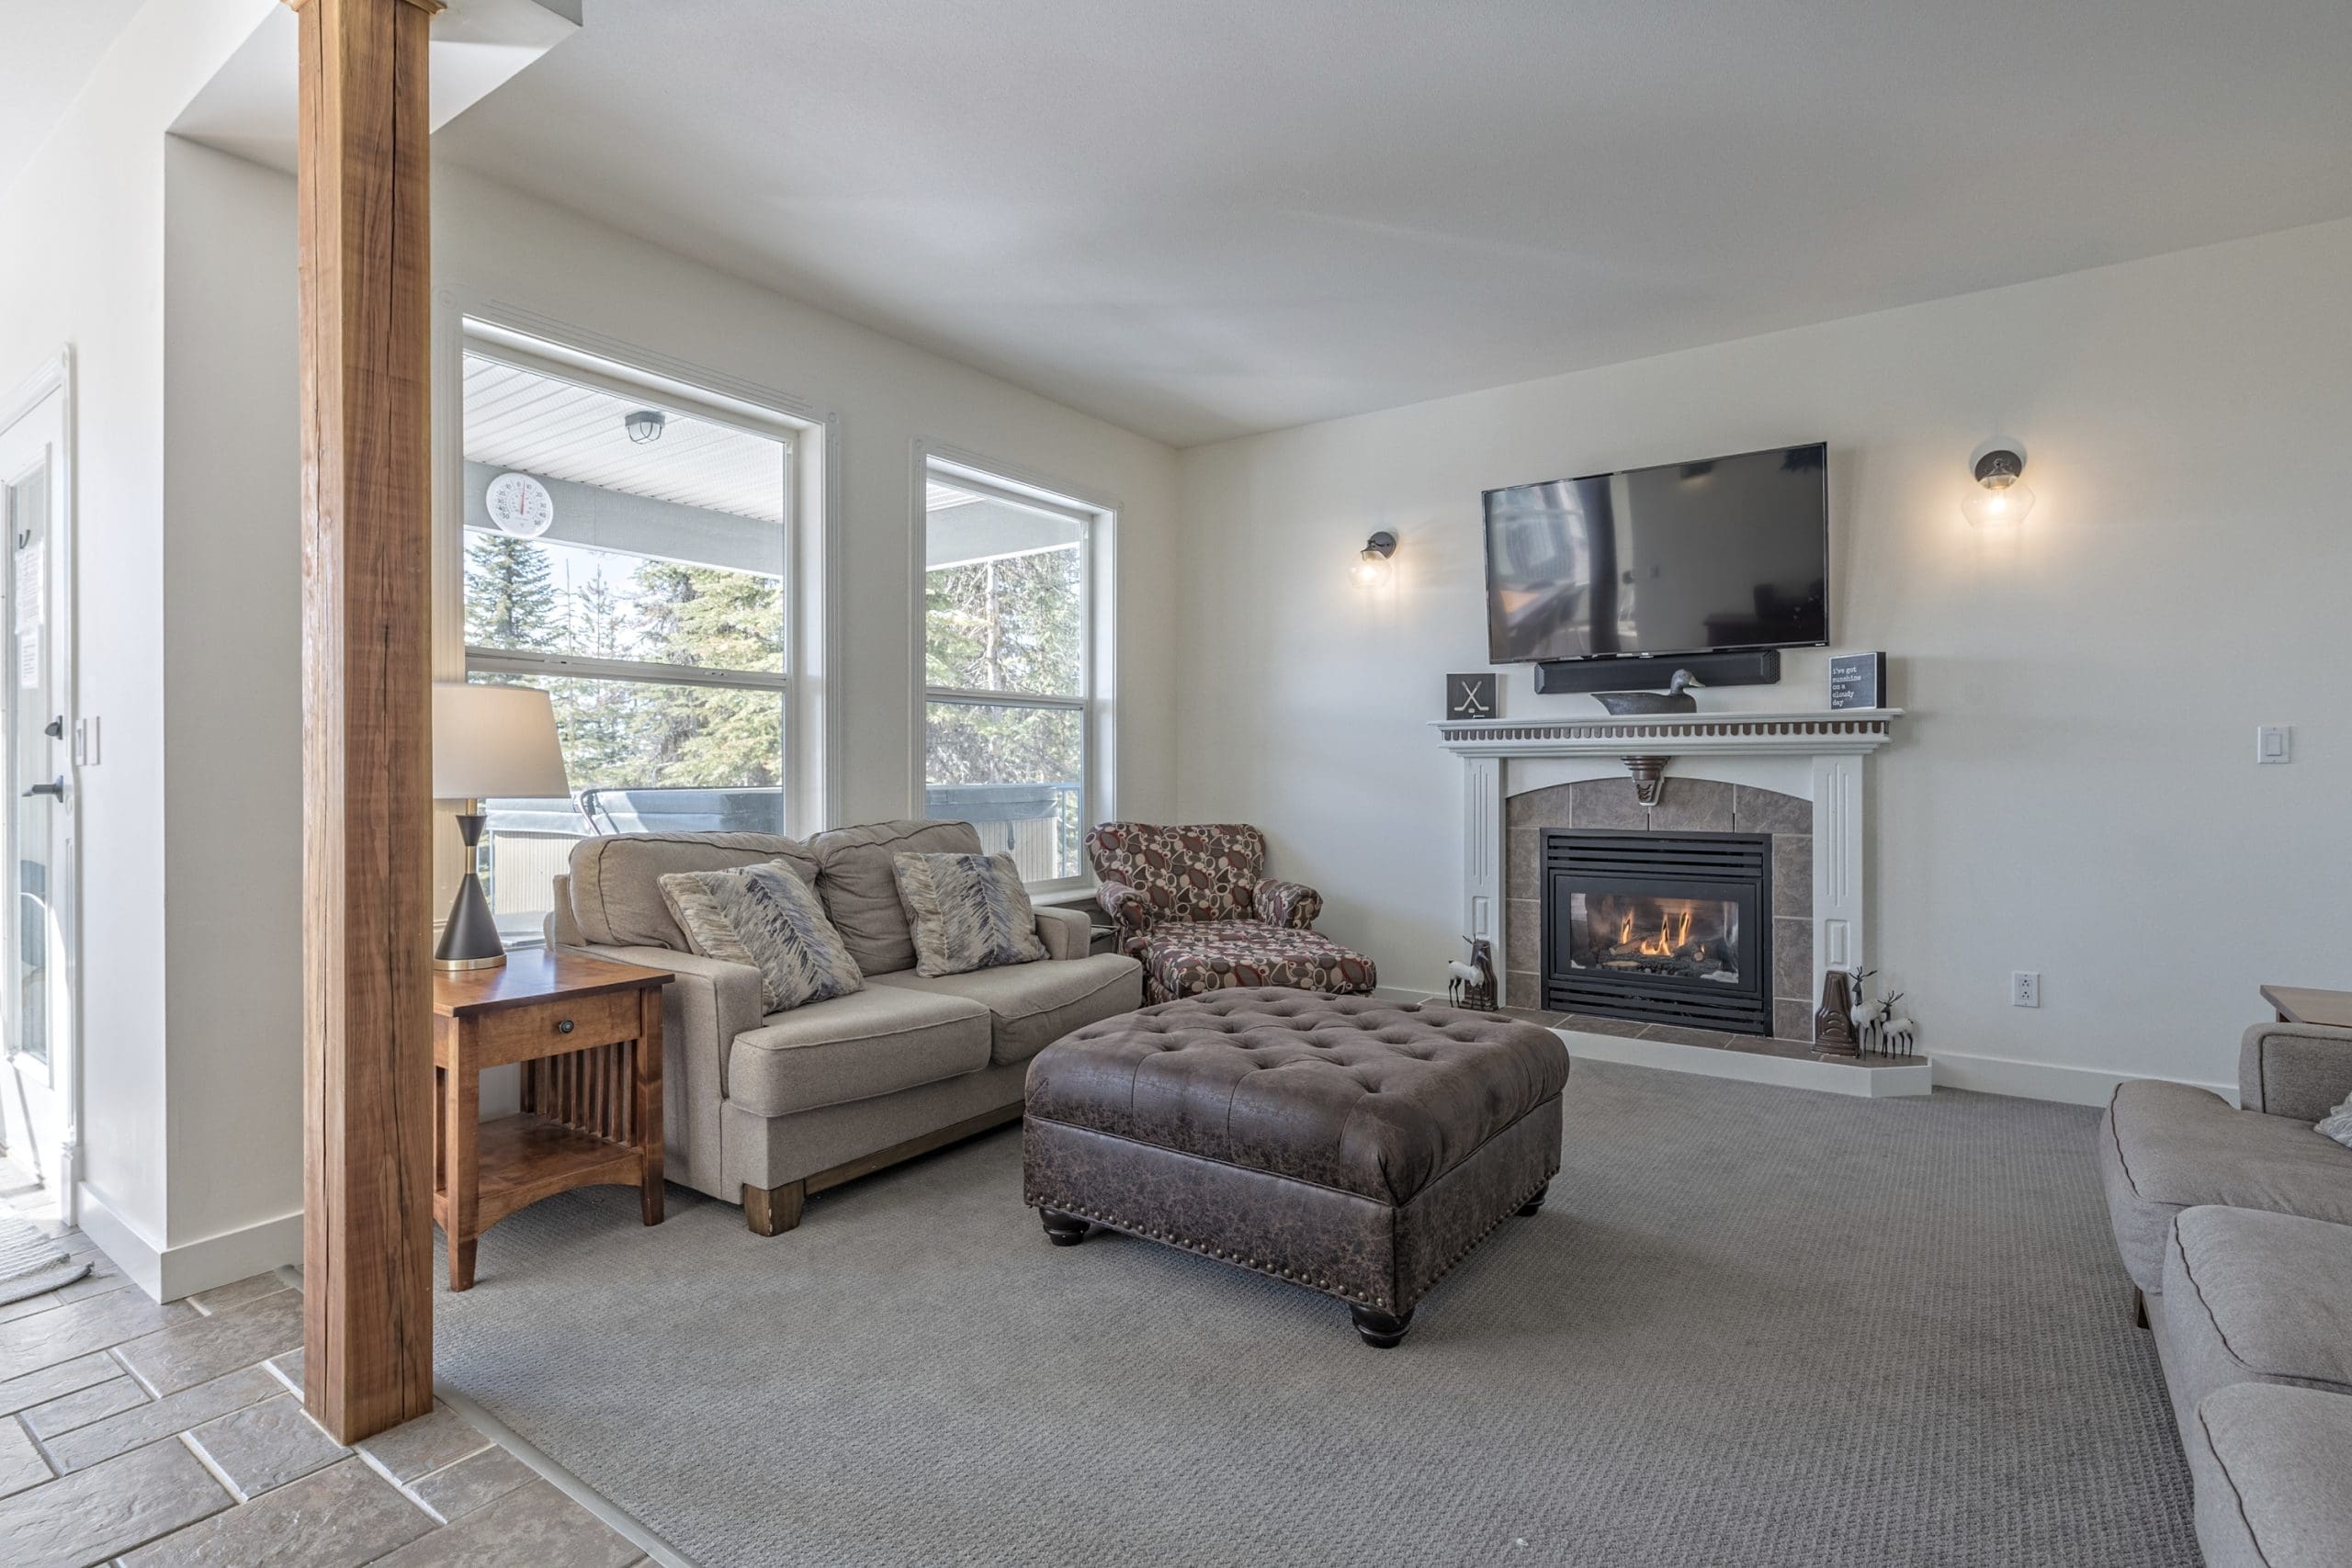 Eldorado Upper living room with incredible mountain views, BBQ on deck, private hot tub, shared laundry and ski room with waxing bench. Amazing ski in and out access right from the house!